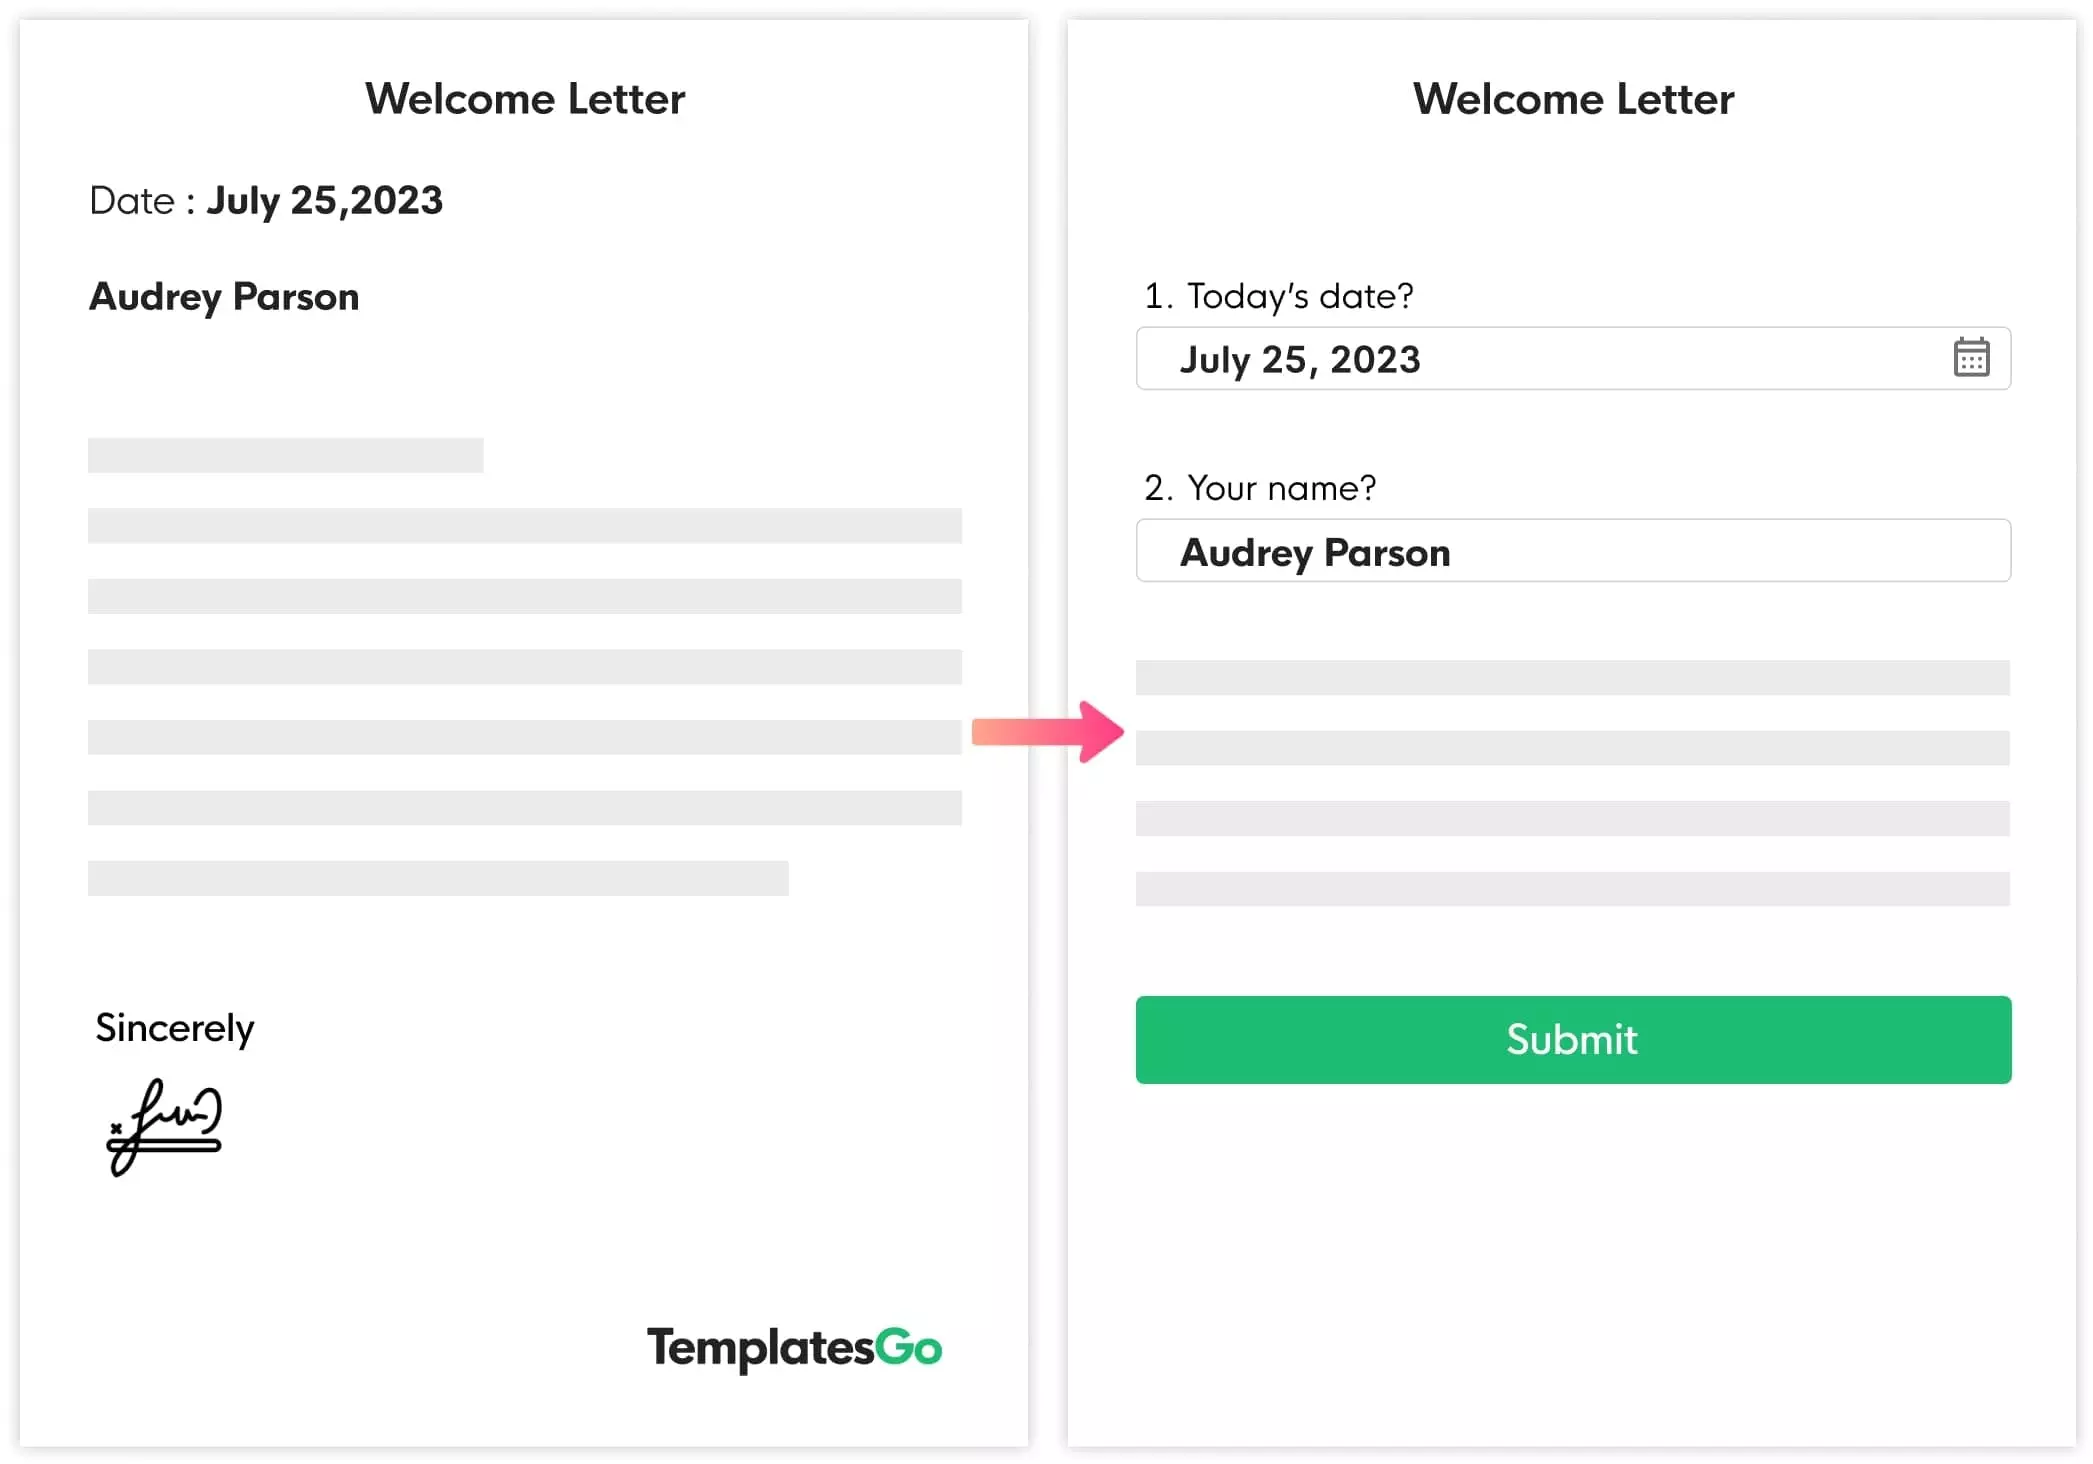 Turn document into fillable forms